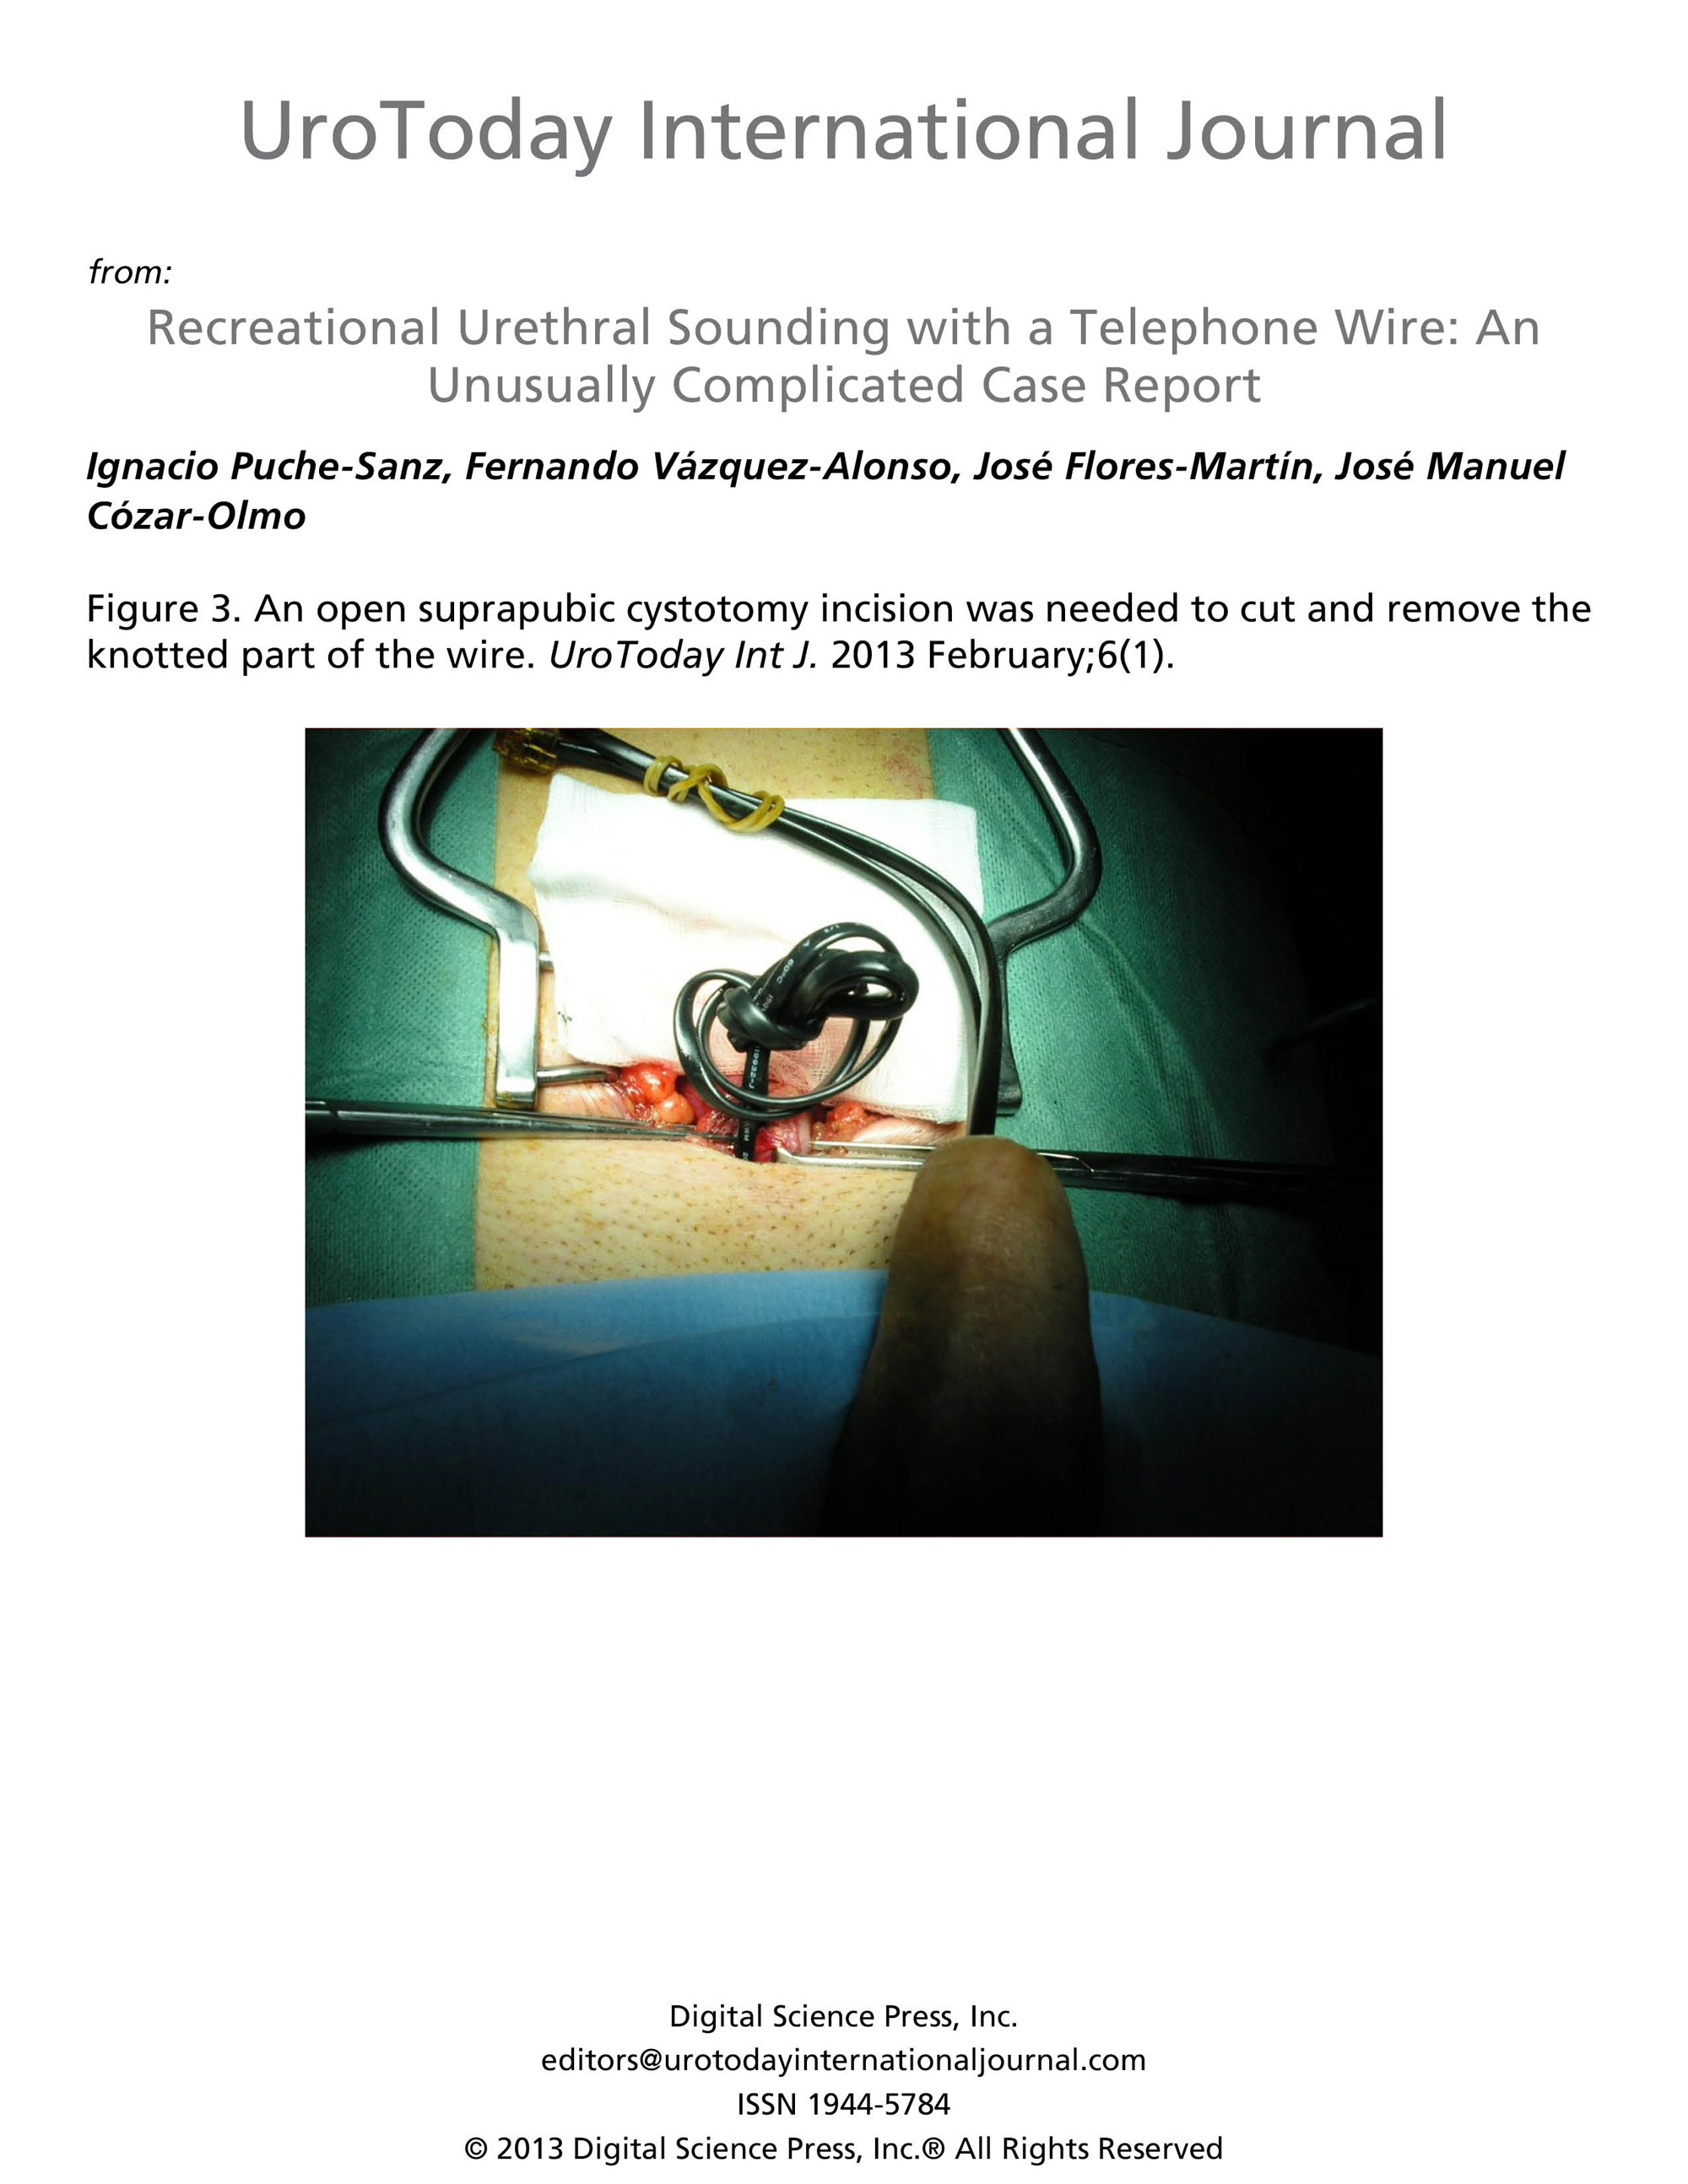 Recreational Urethral Sounding with a Telephone Wire An Unusually Complicated Case Report